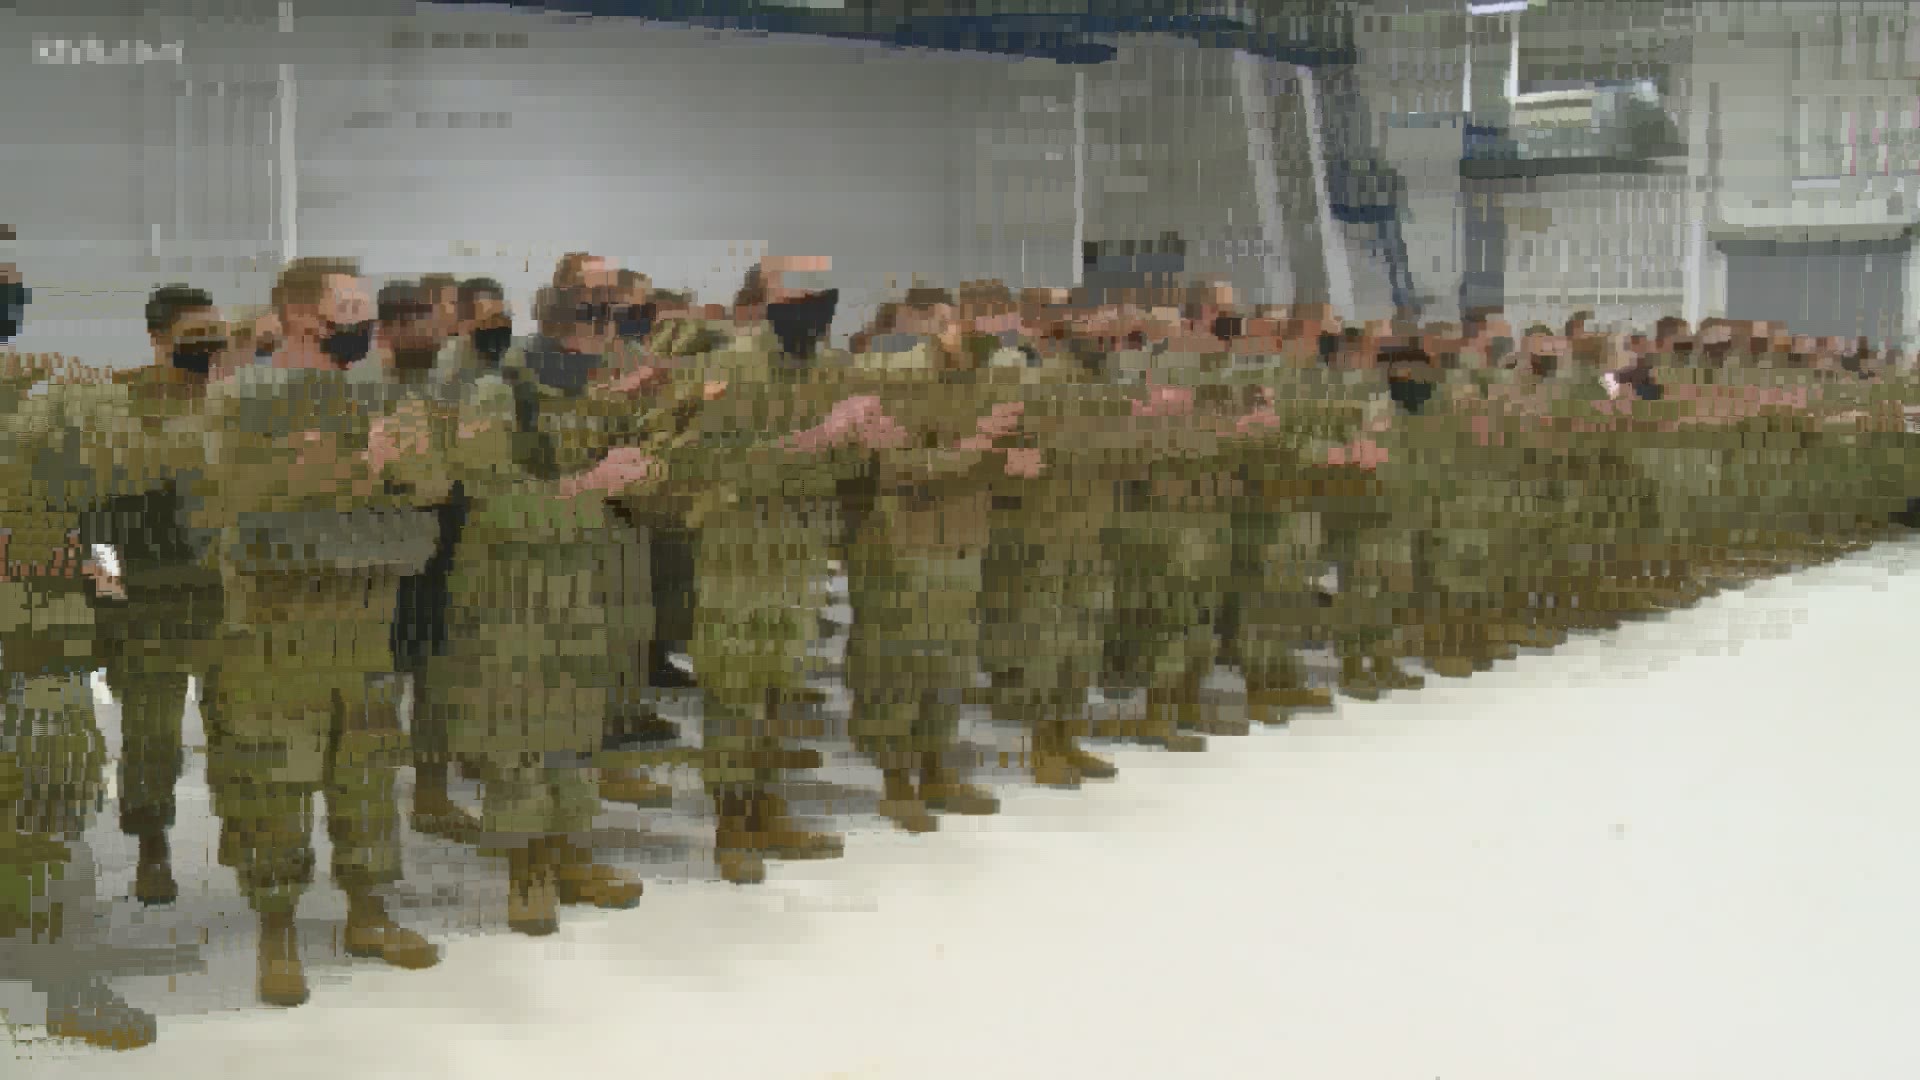 After a deployment to help with security operations in D.C. during inauguration week, 300 members of the Idaho national guard returned home Sunday afternoon.